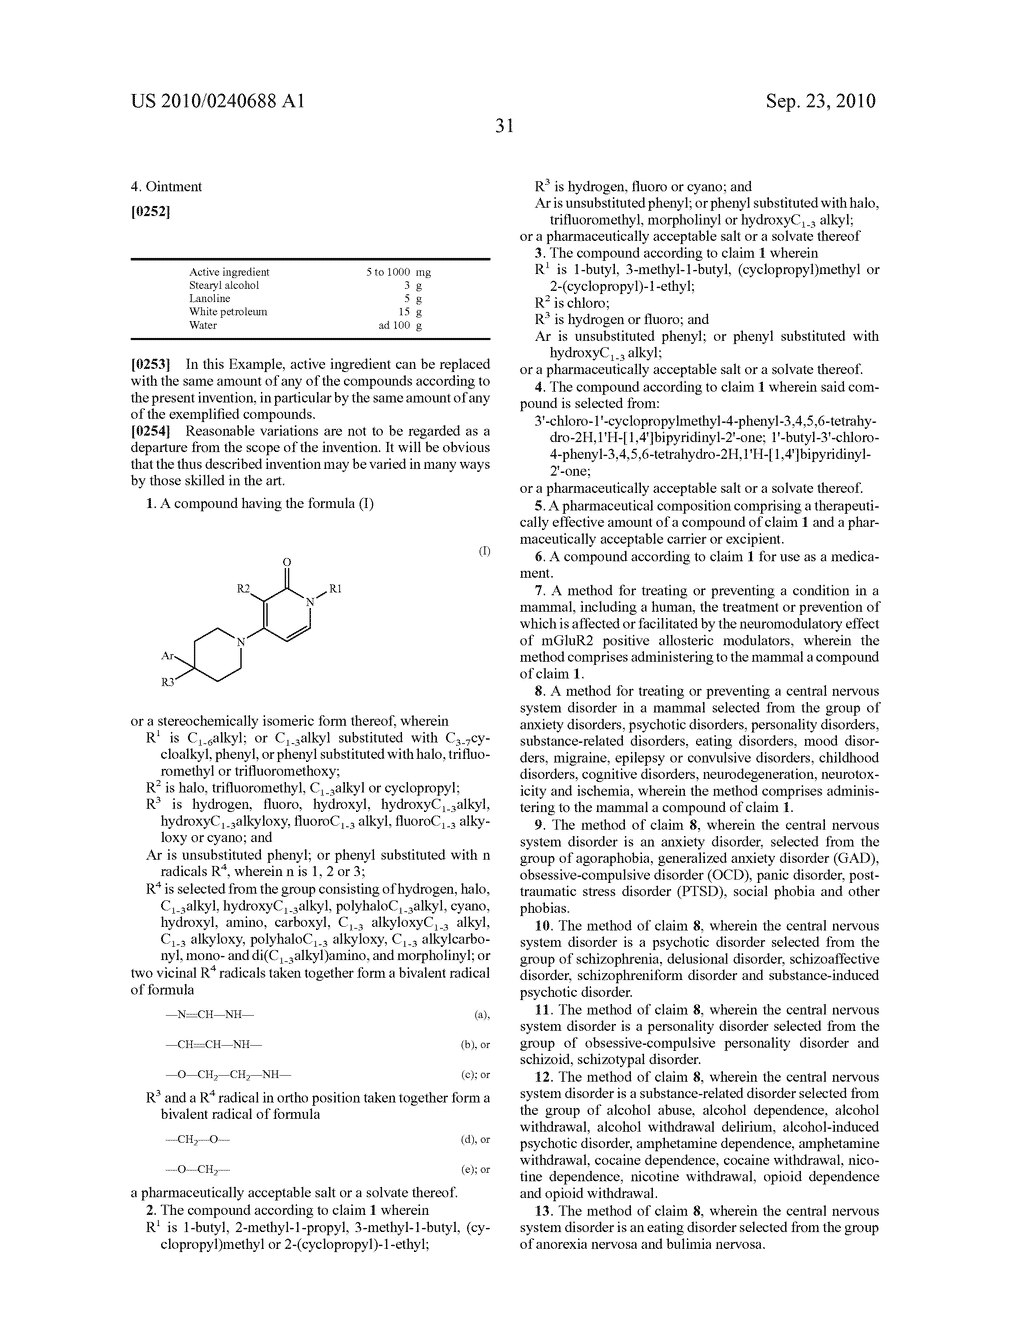 1,3-DISUBSTITUTED-4-PHENYL-3,4,5,6-TETRAHYDRO-2H,1 H-1,4 BIPYRIDINYL-2-ONES - diagram, schematic, and image 32